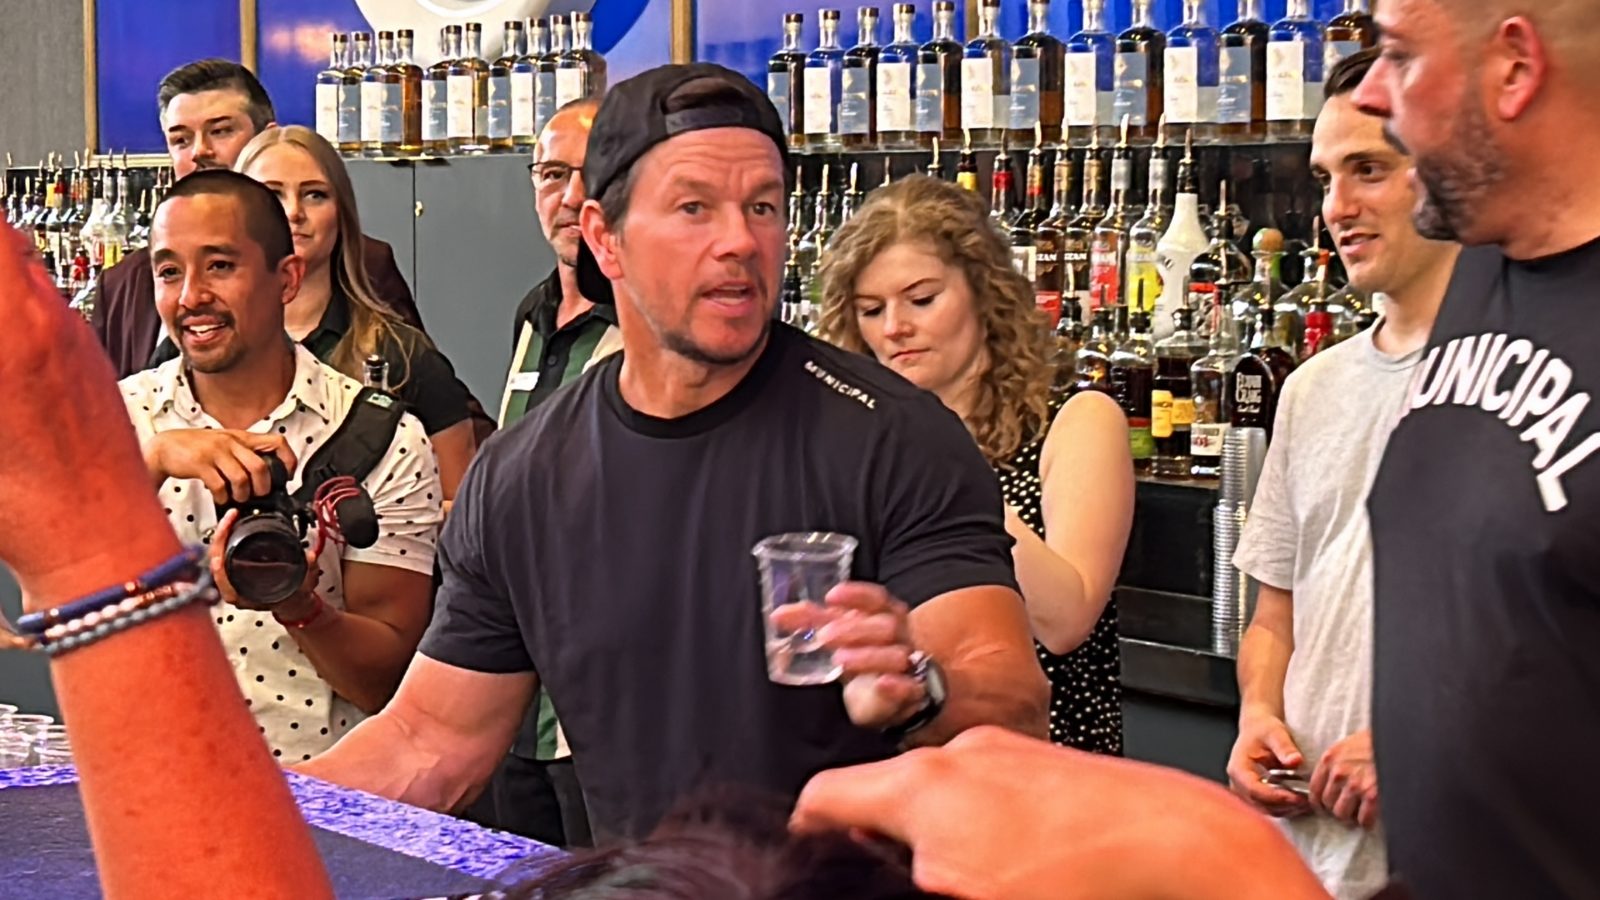 Mark Wahlberg Shows Off Buzz Cut While Promoting Tequila: Photos